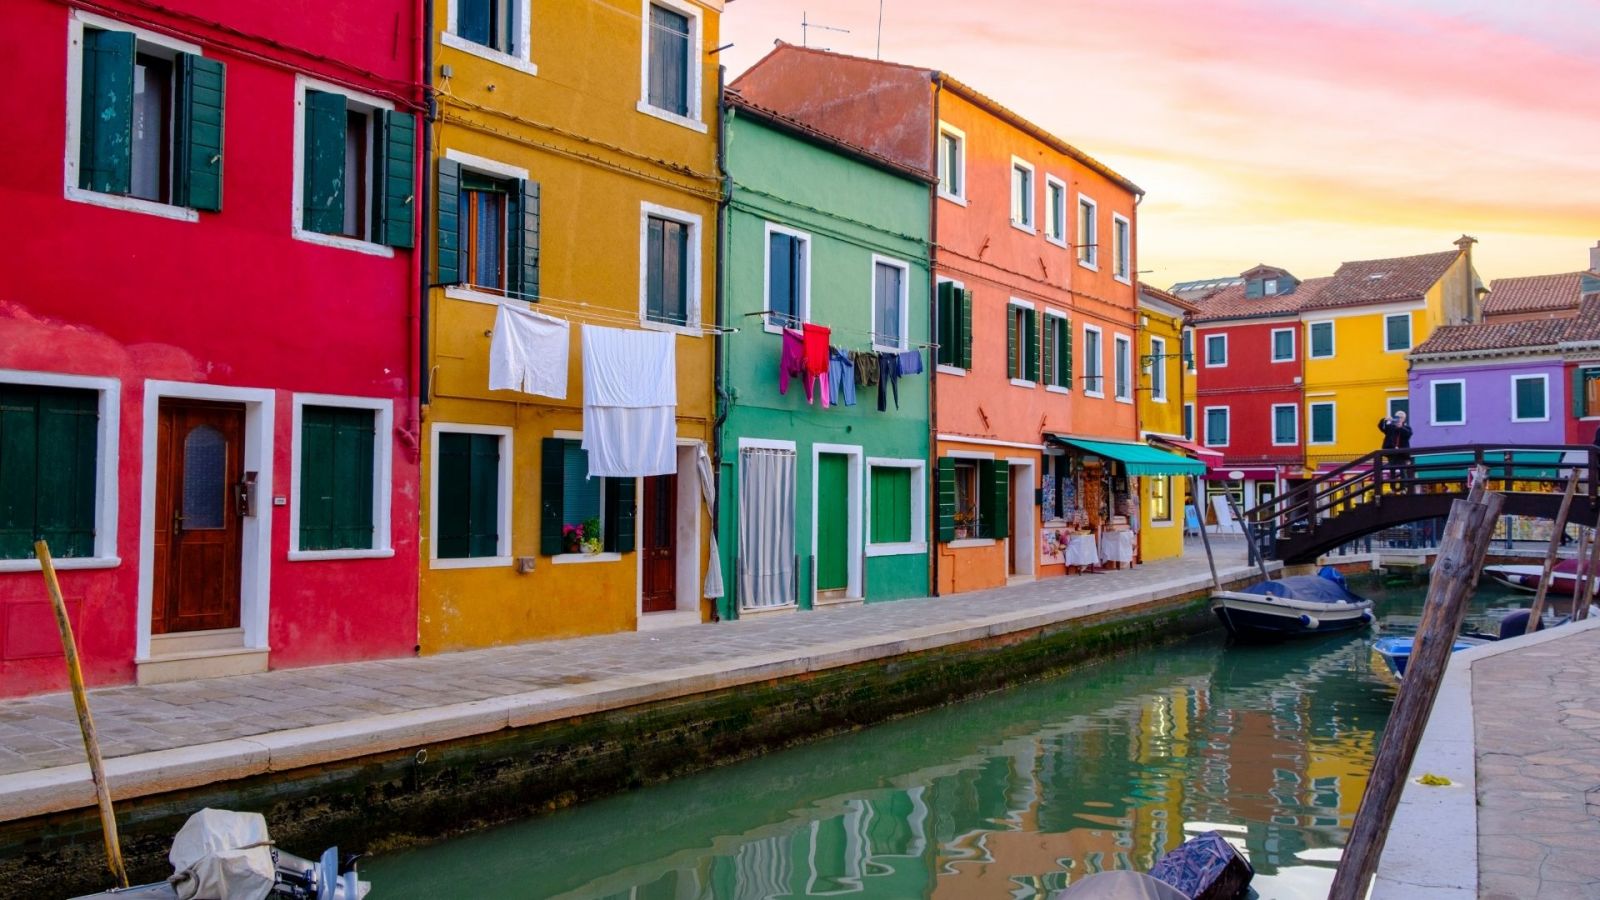 Venice Holidays. Colourful Buildings Next To A Canal